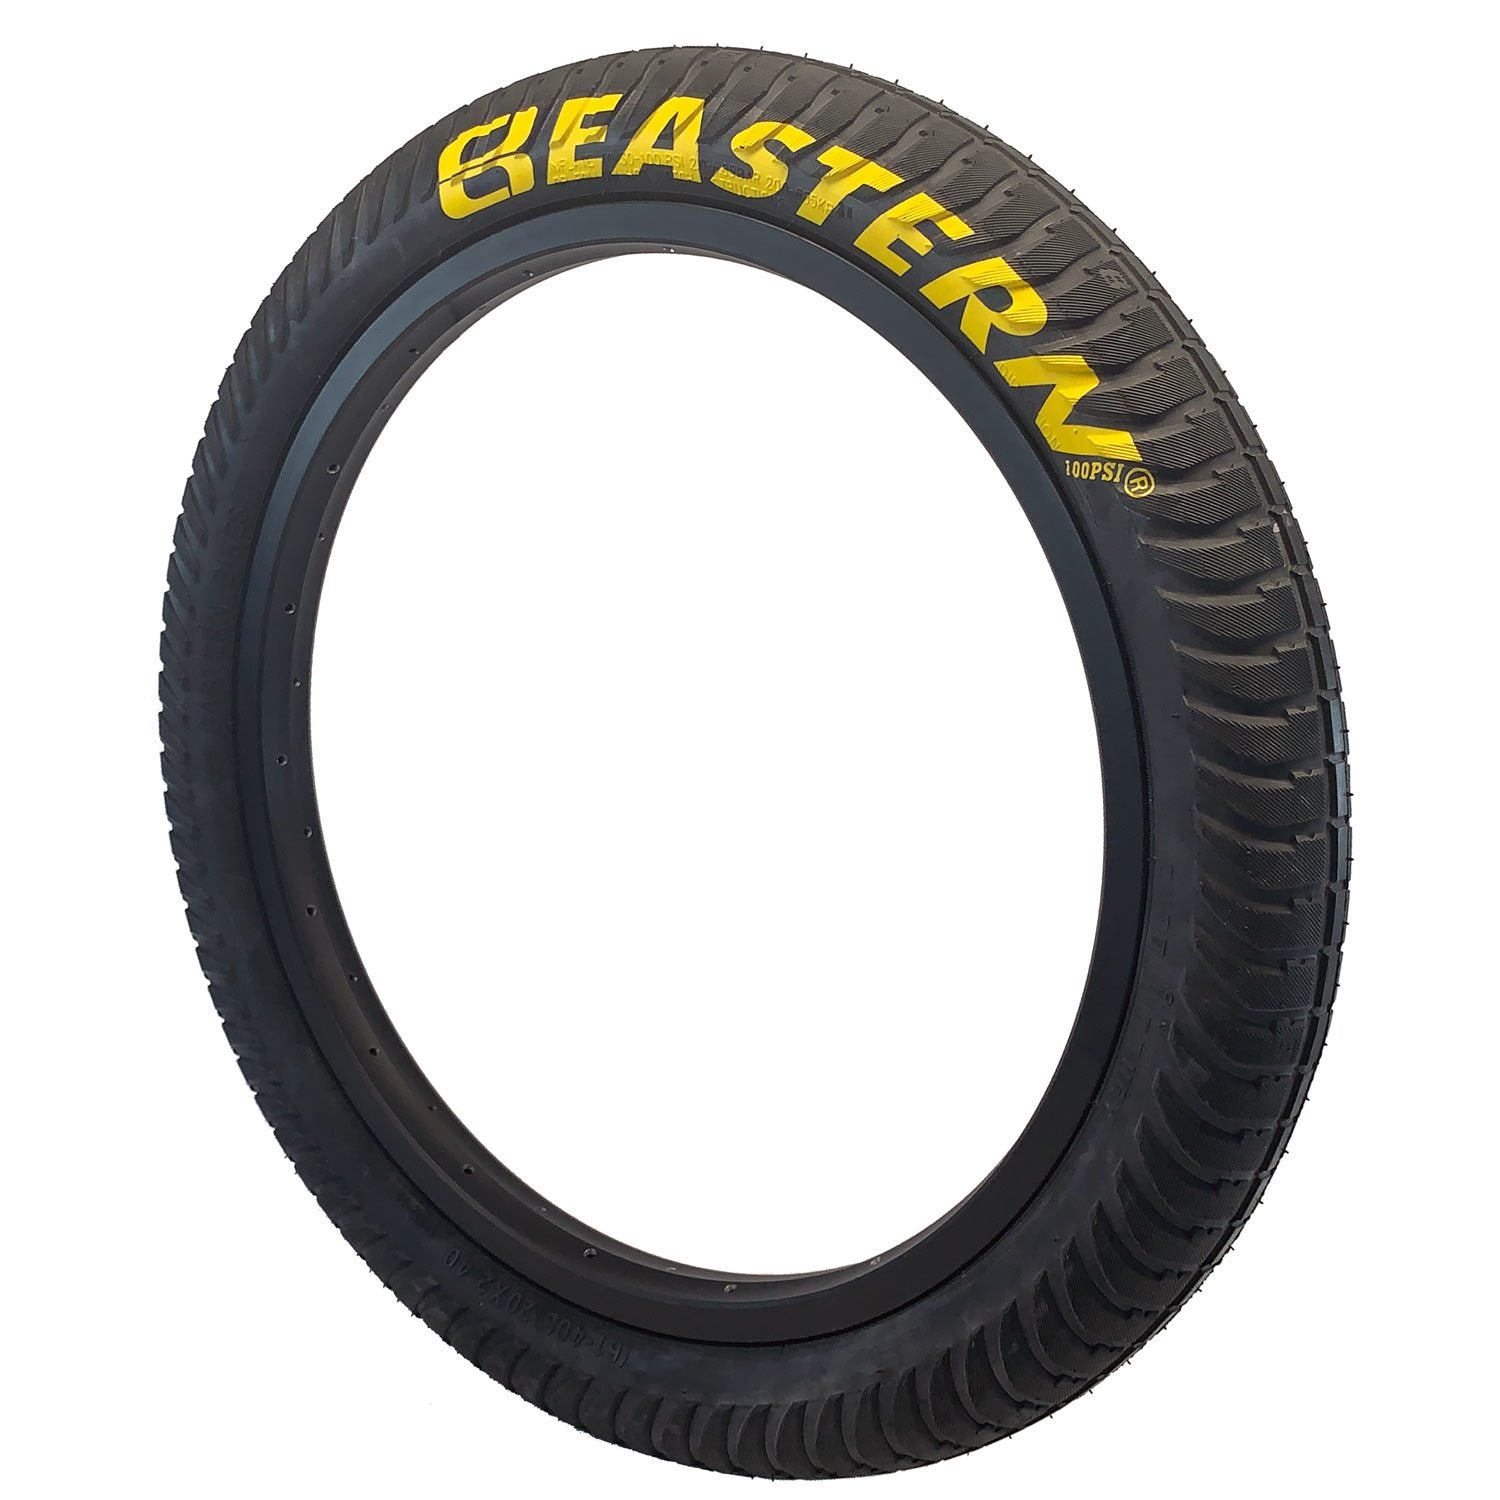 eastern bikes 20 inch curb monkey tires 100psi black and yellow 7